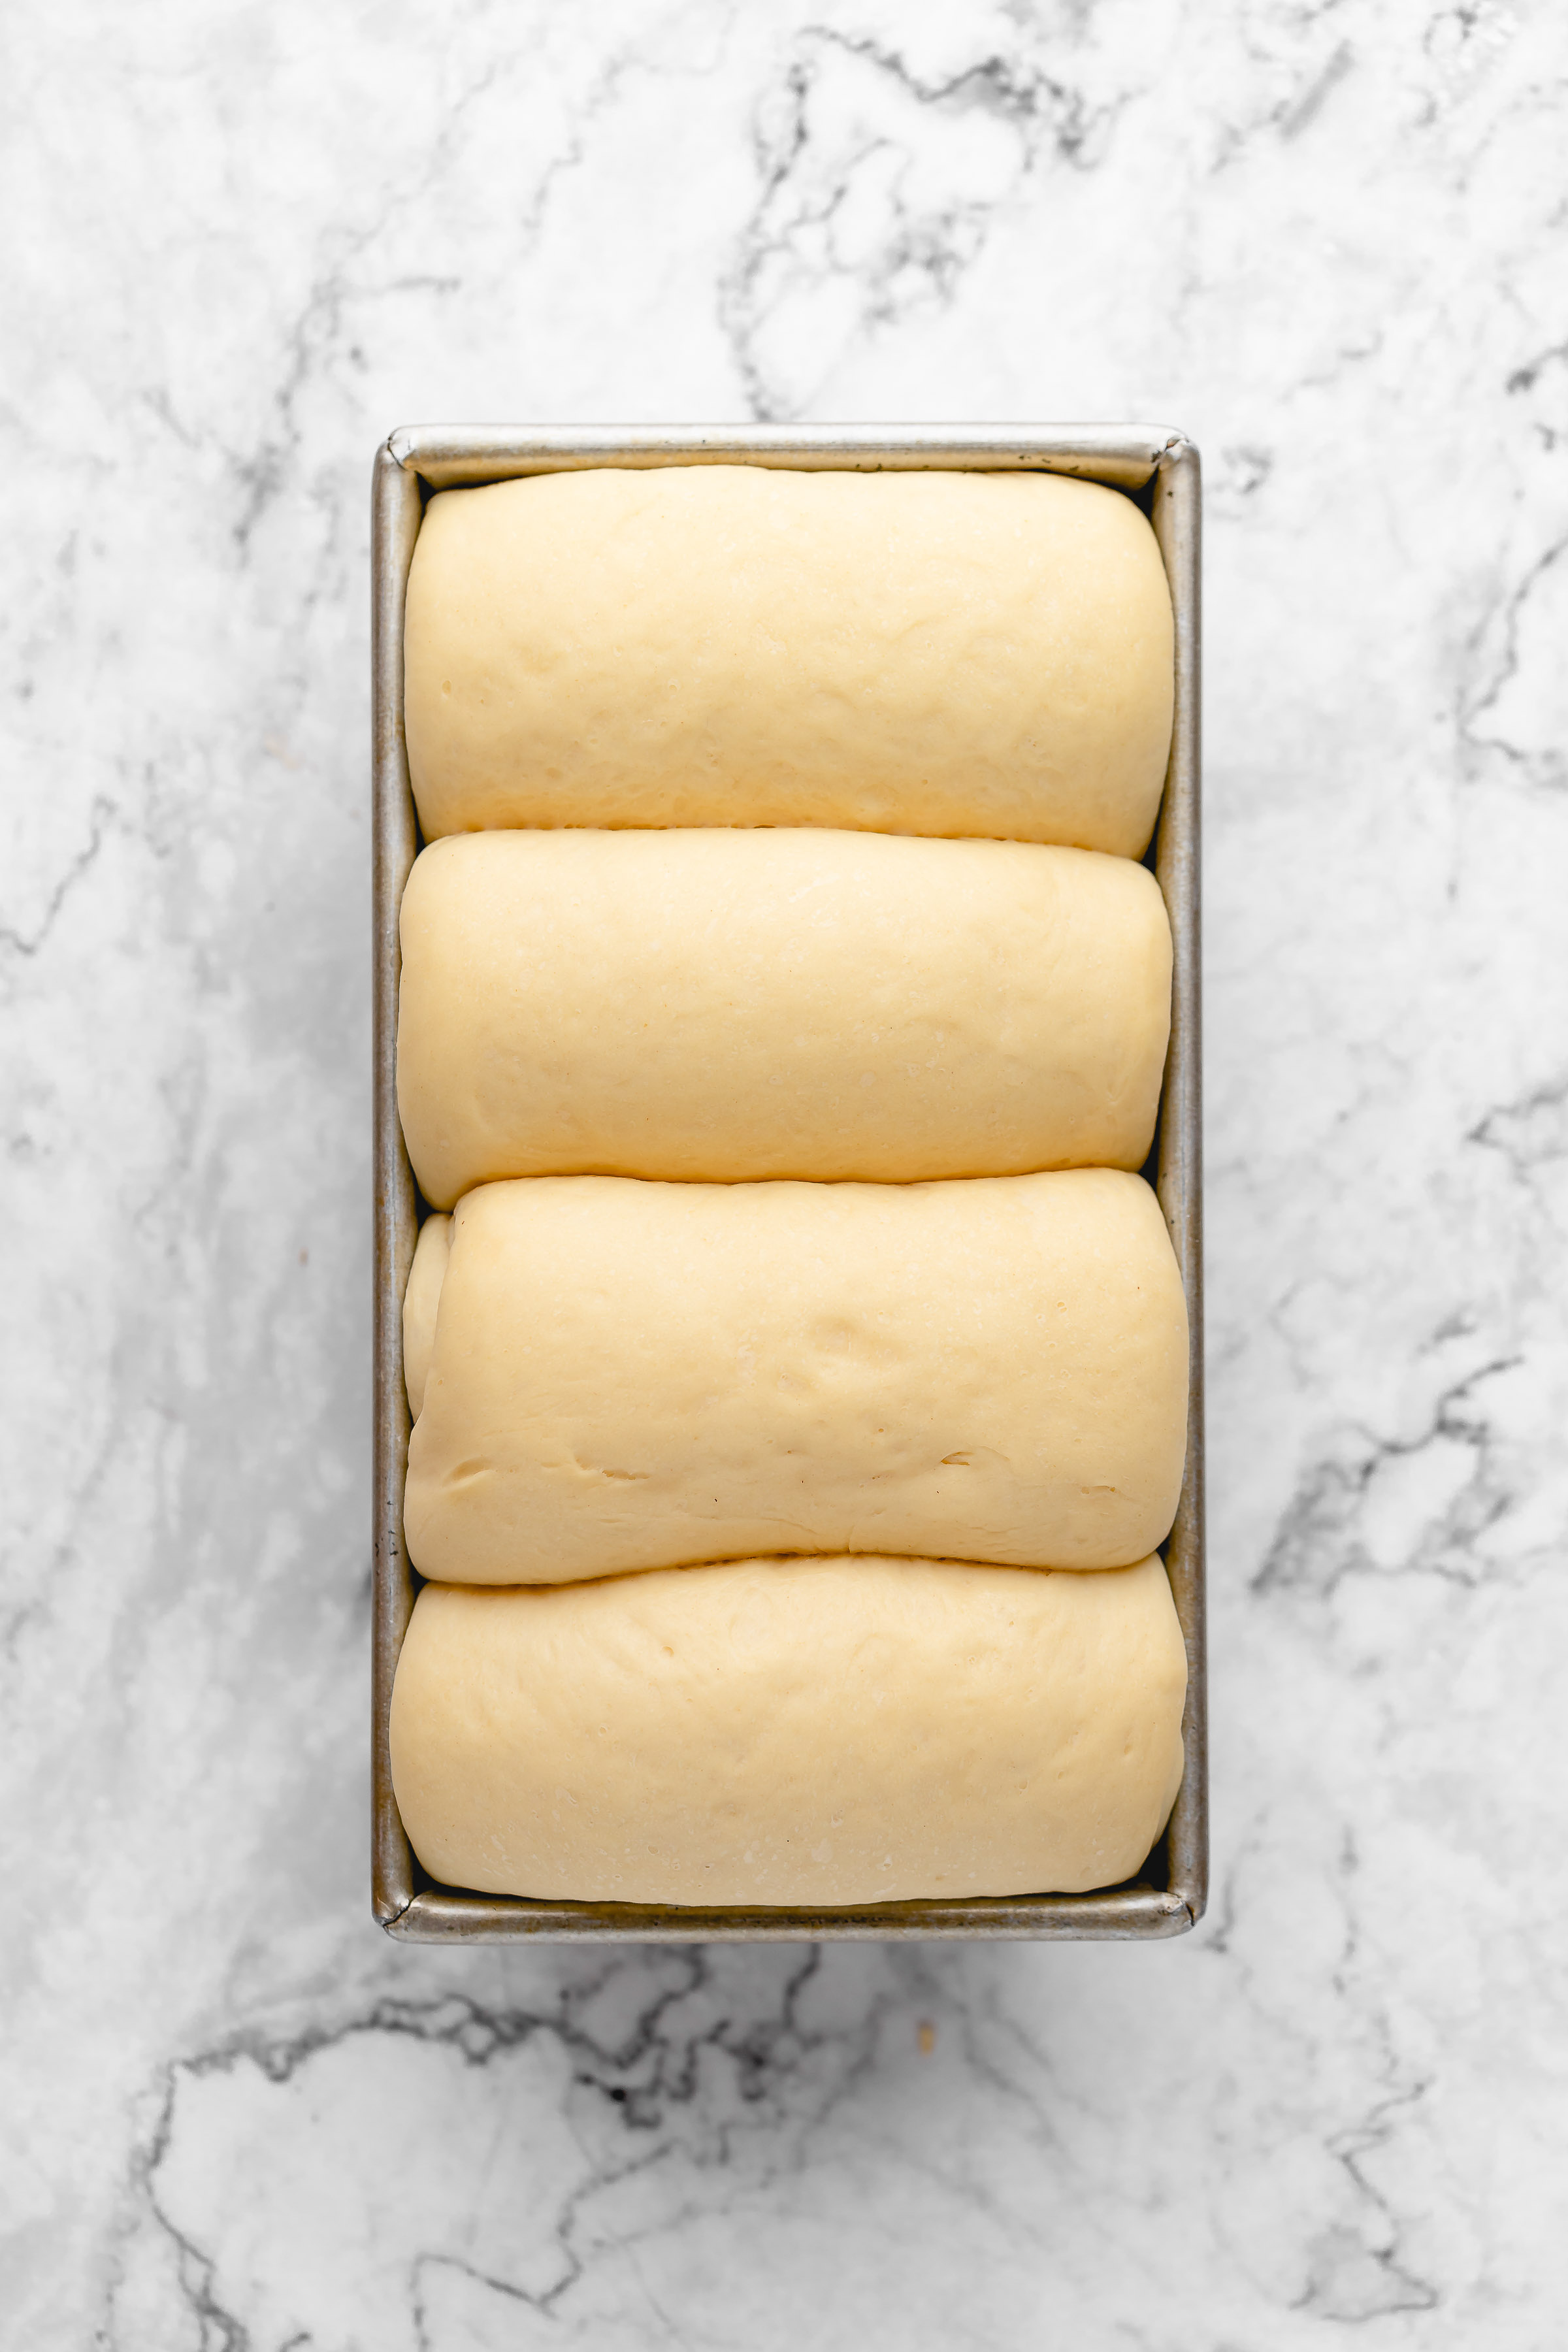 Overhead view of milk bread dough in loaf pan